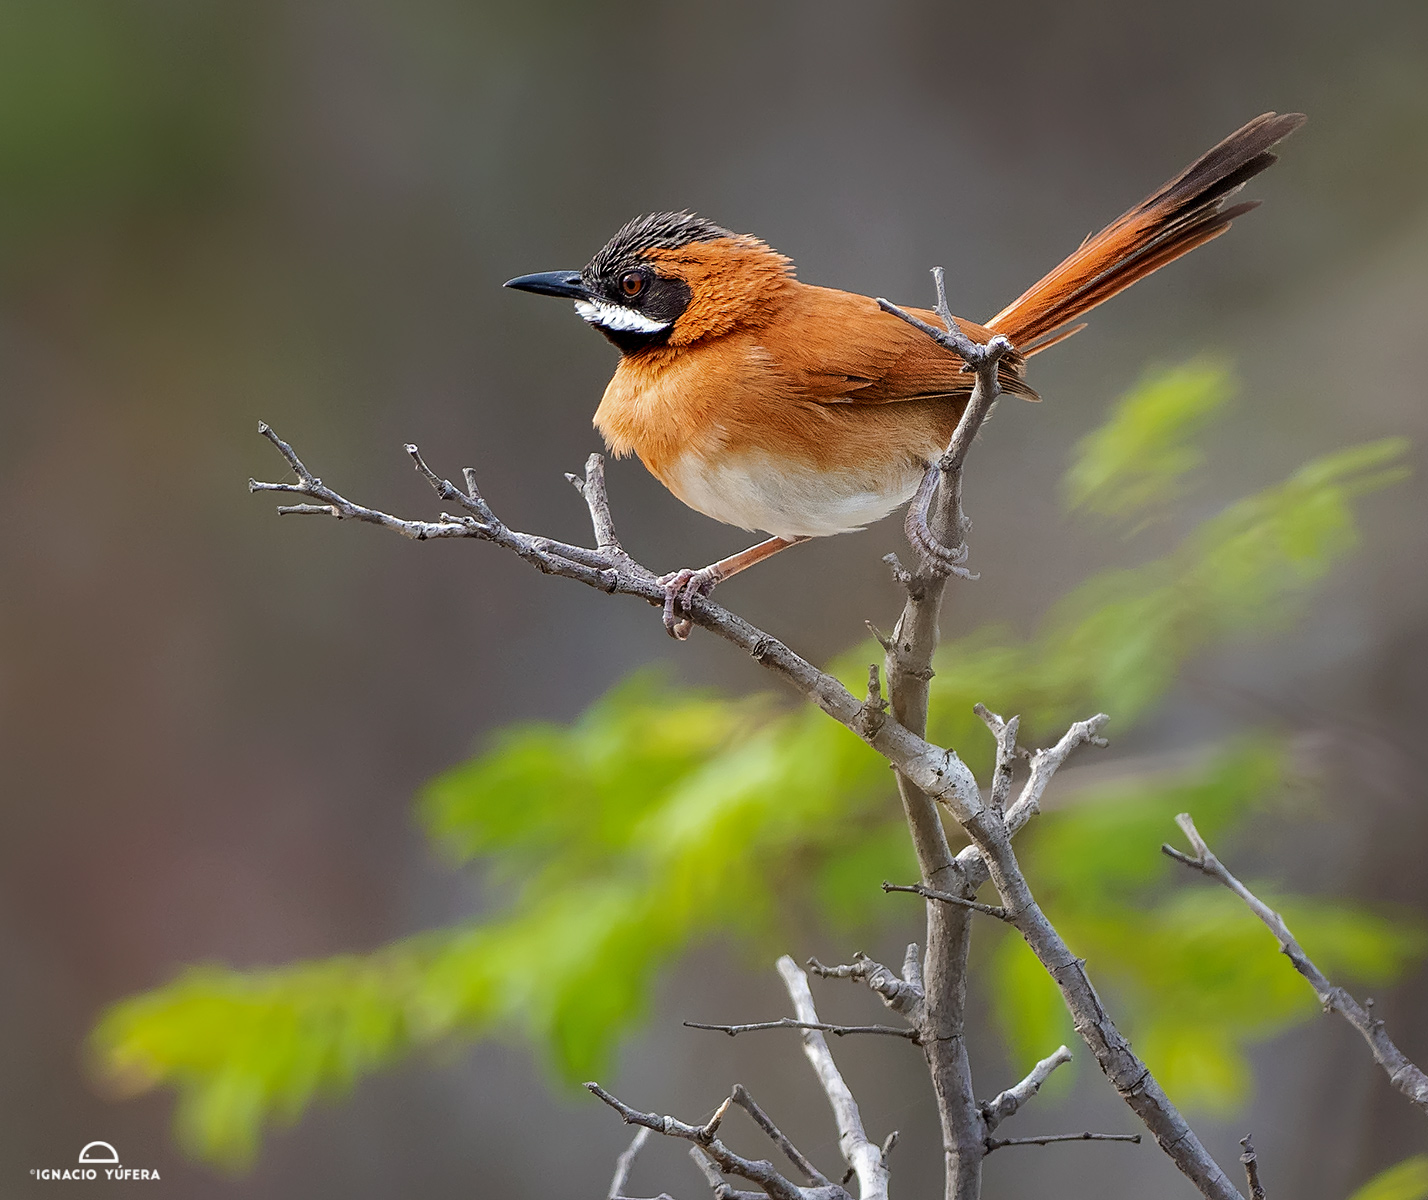 White-whiskered Spinetail (Synallaxis candei), La Guajira, Colombia